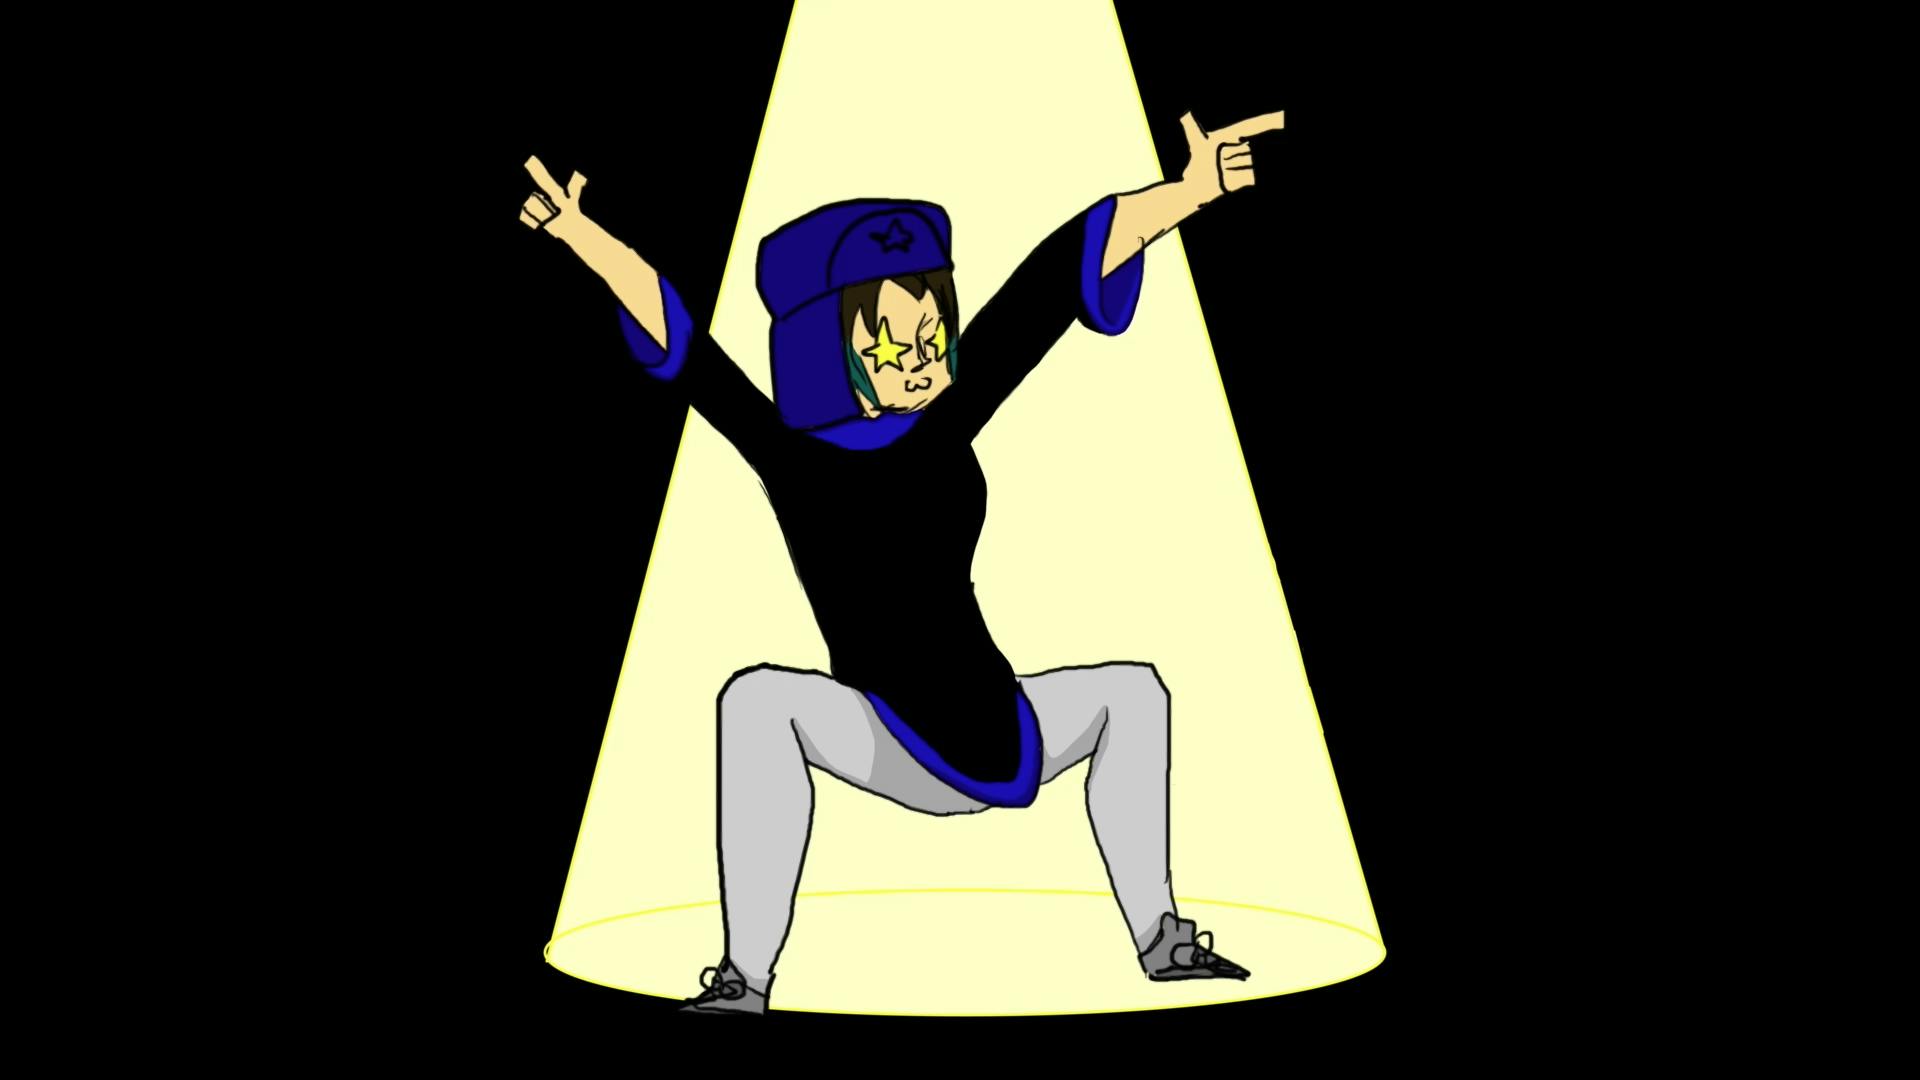 drawing of an animated character in a spotlight, hands extended in a victory pose. They have stars in their eyes